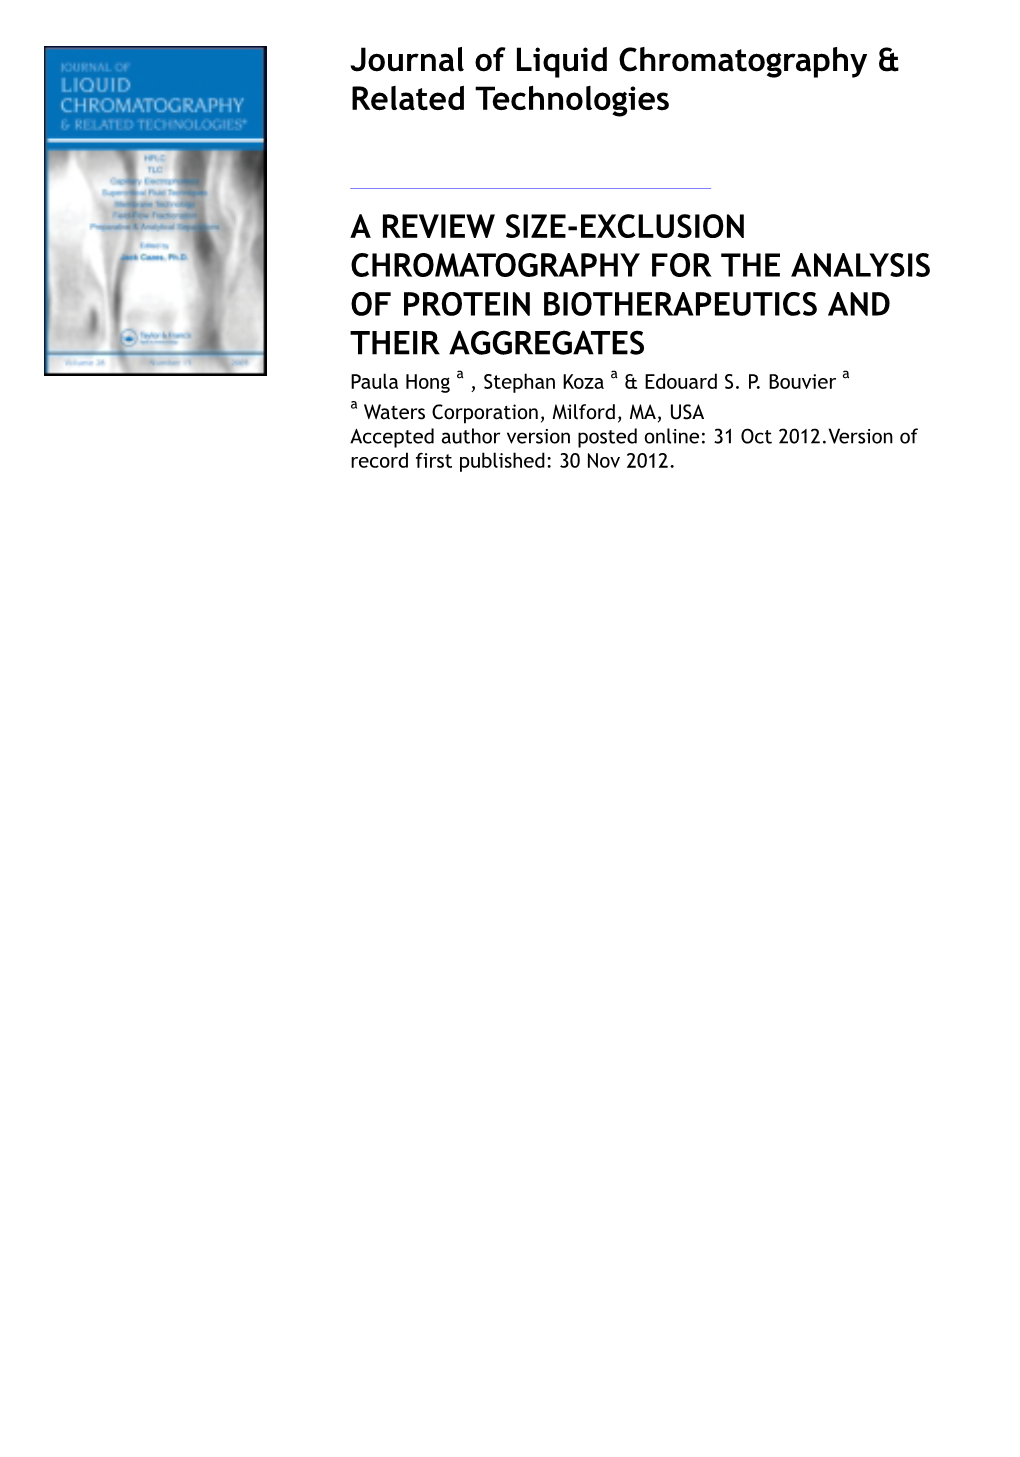 A Review of Size-Exclusion Chromatography for the Analysis Of